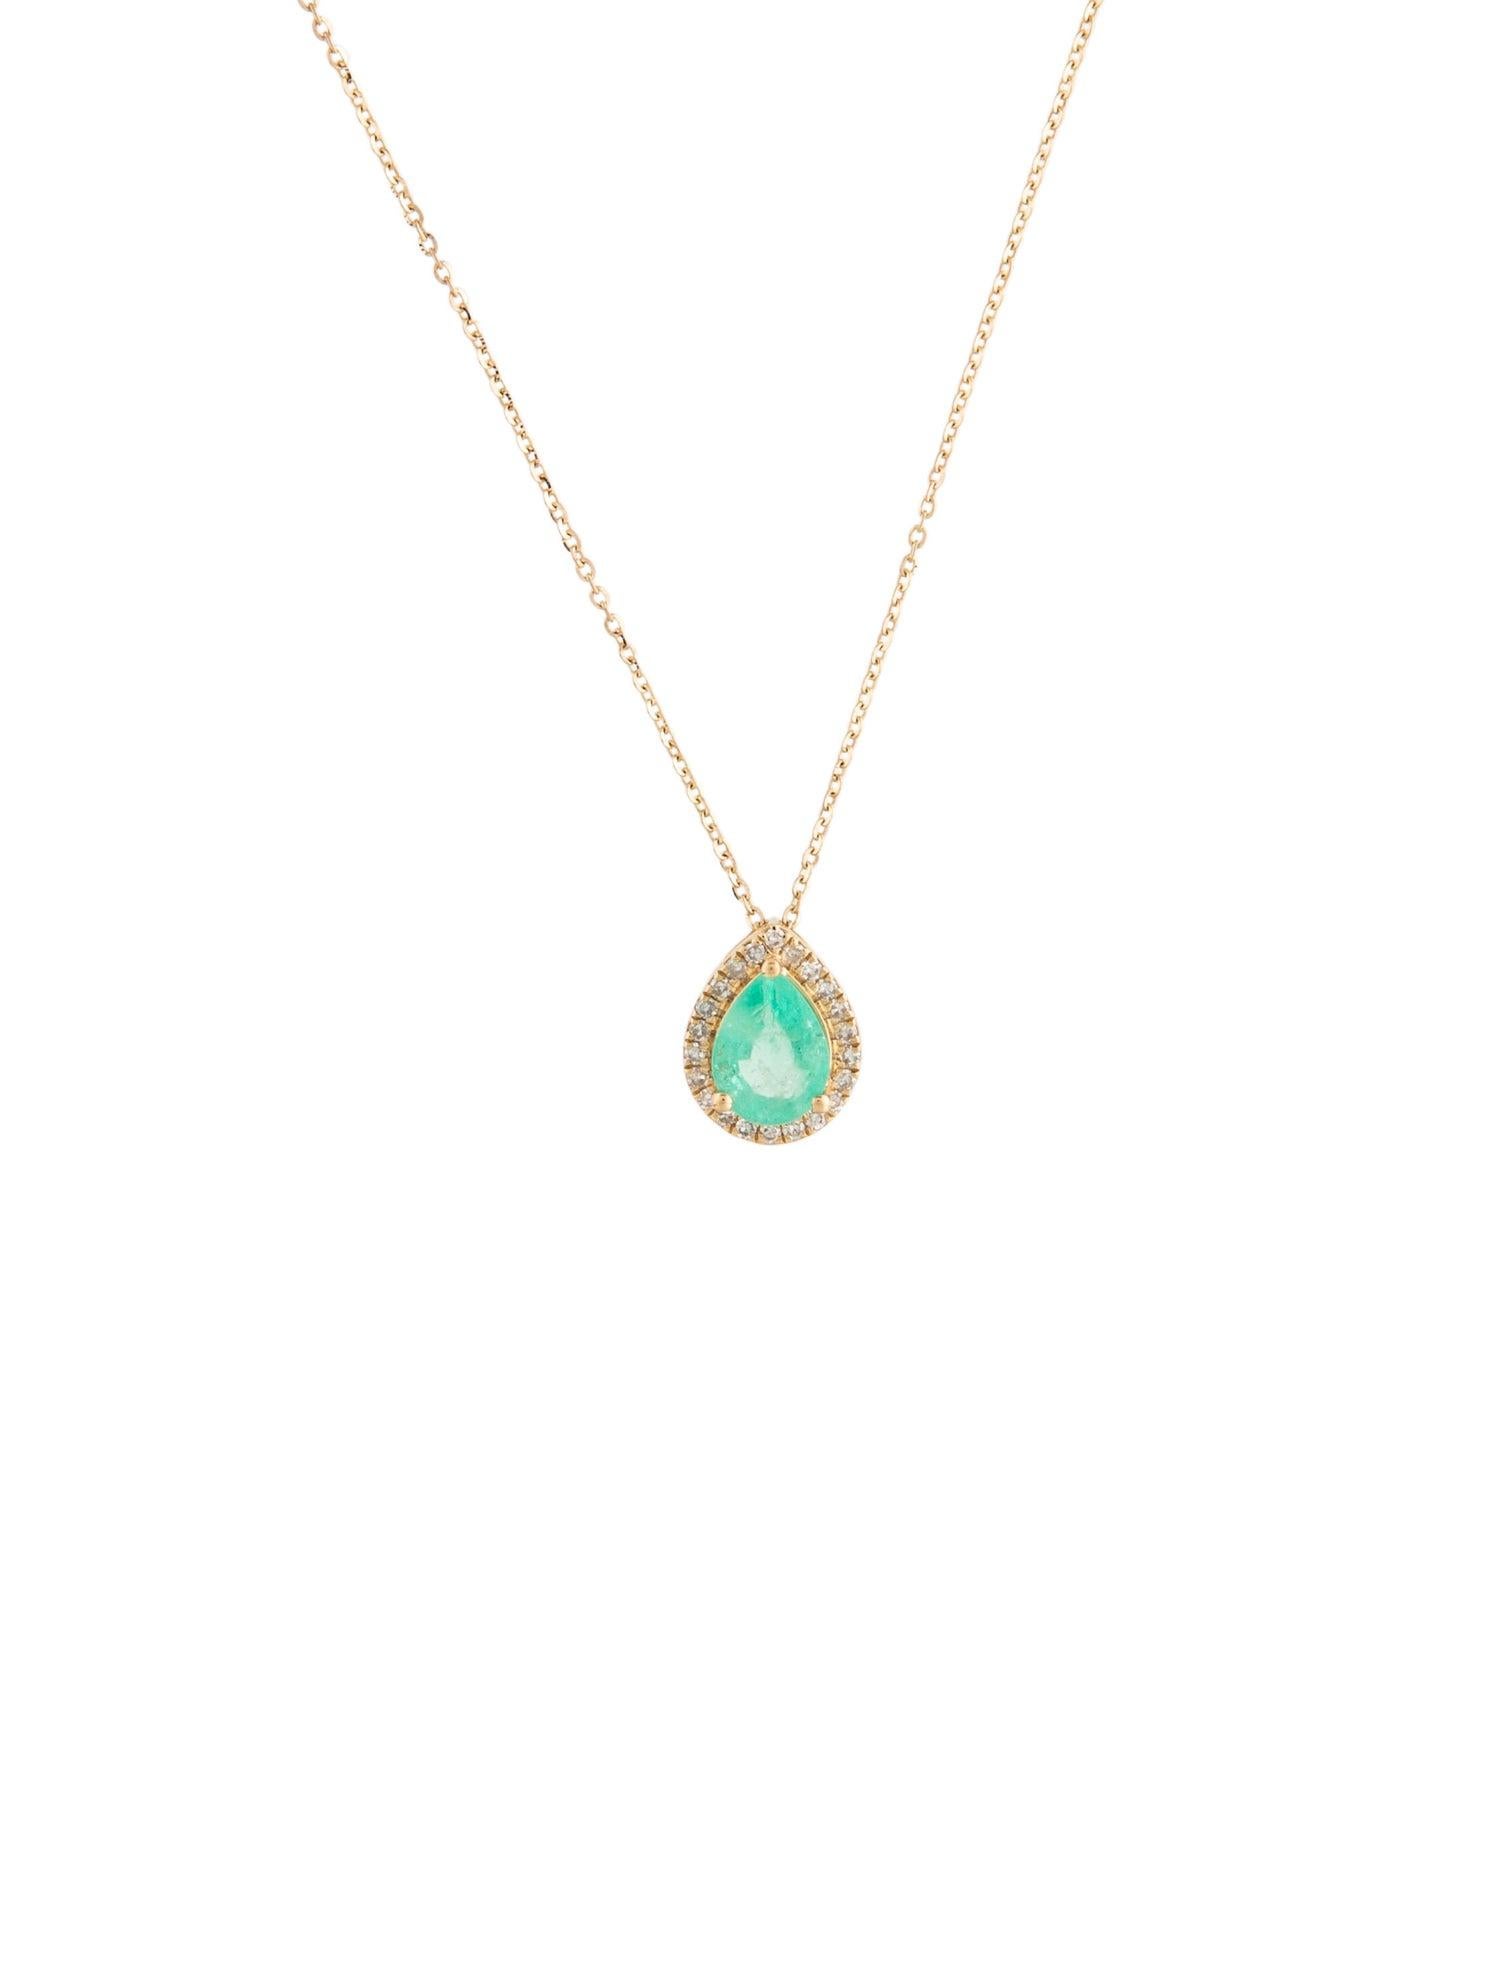 14K Emerald & Diamond Pendant Necklace - Elegant Gemstone Statement Piece In New Condition For Sale In Holtsville, NY